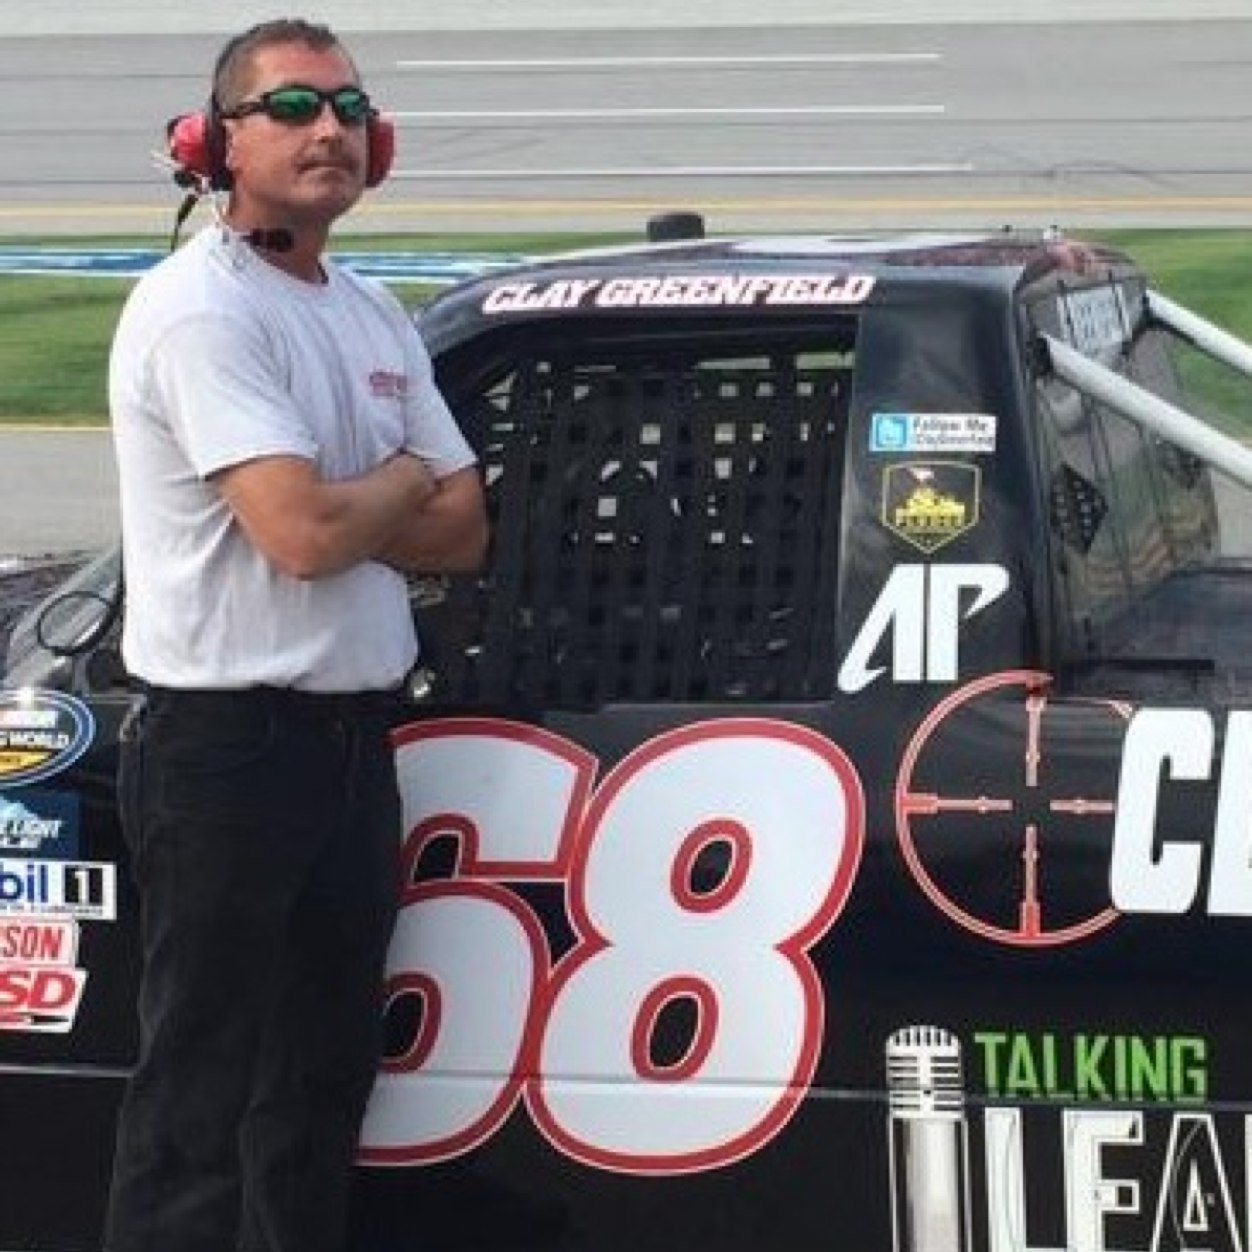 Truck chief on the 68 nascar camping world truck. Just living the dream. Murfreesboro TN.